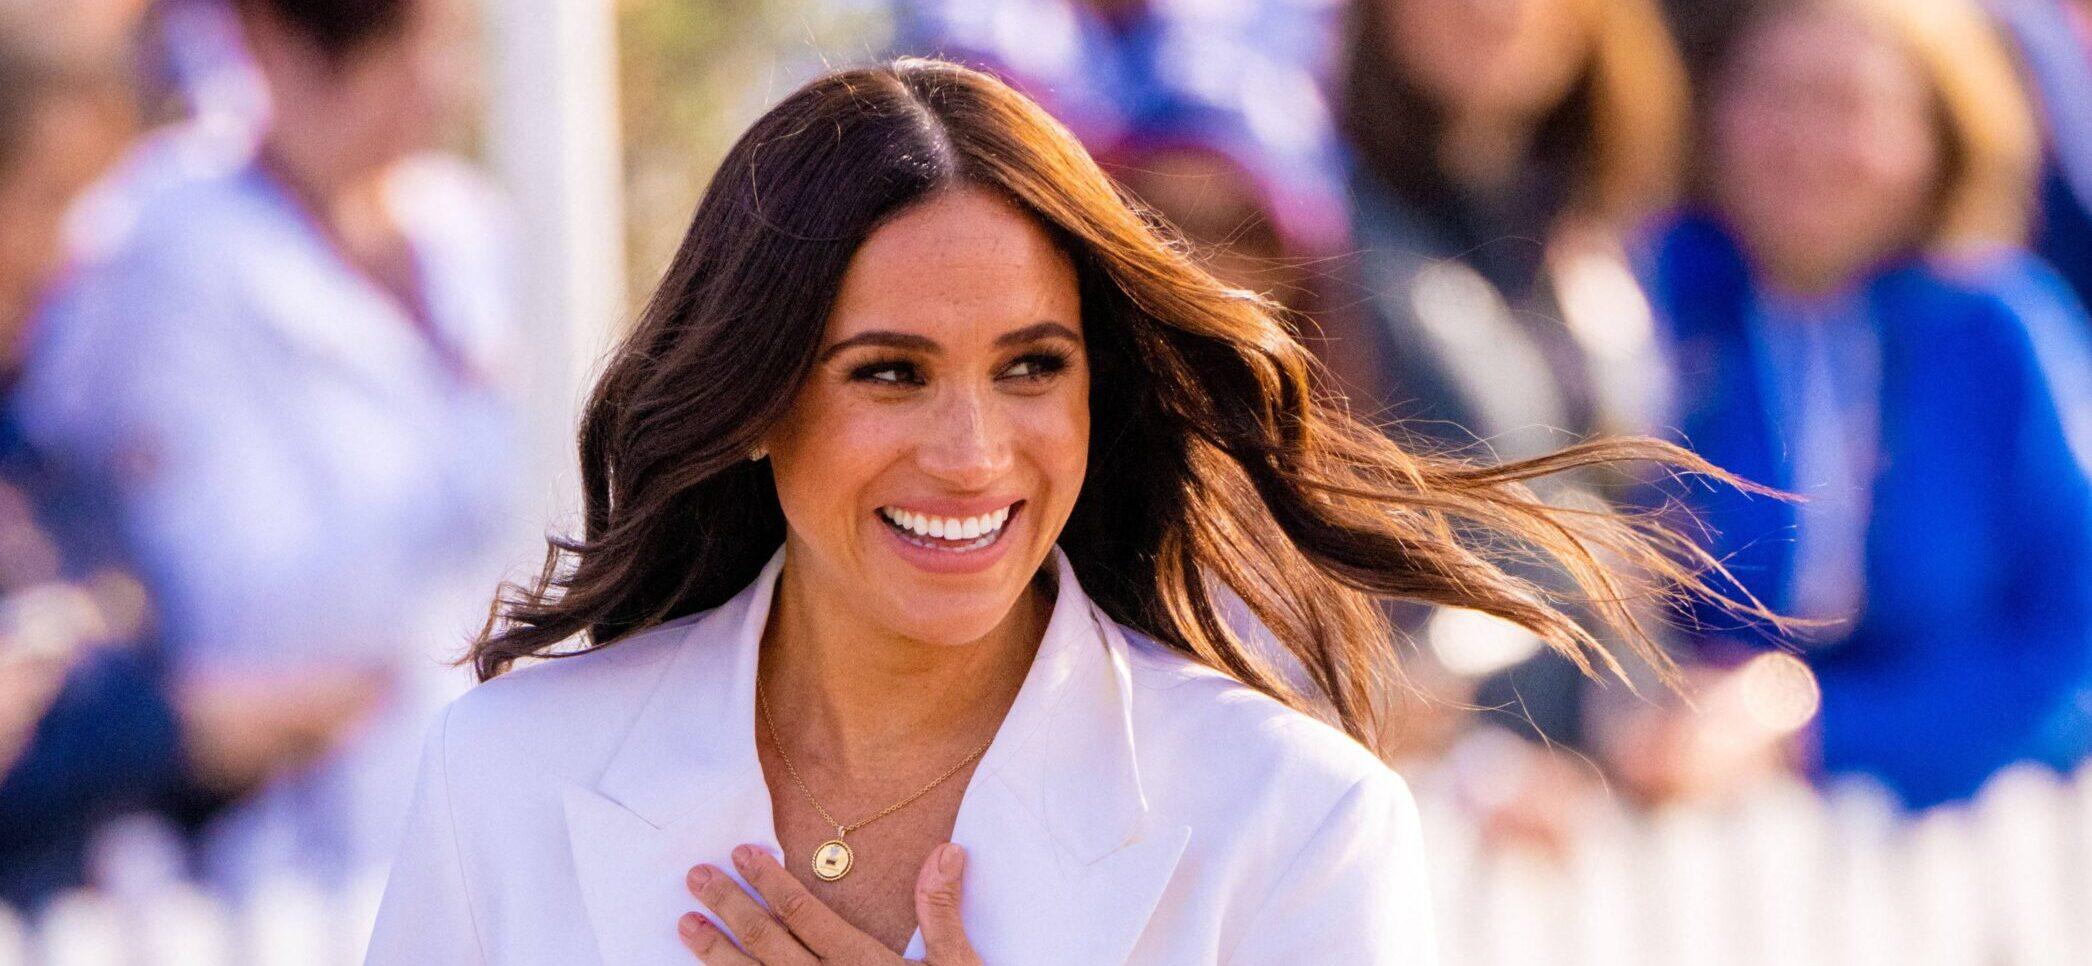 Meghan Markle’s Drastic Weight Loss Cause Revealed